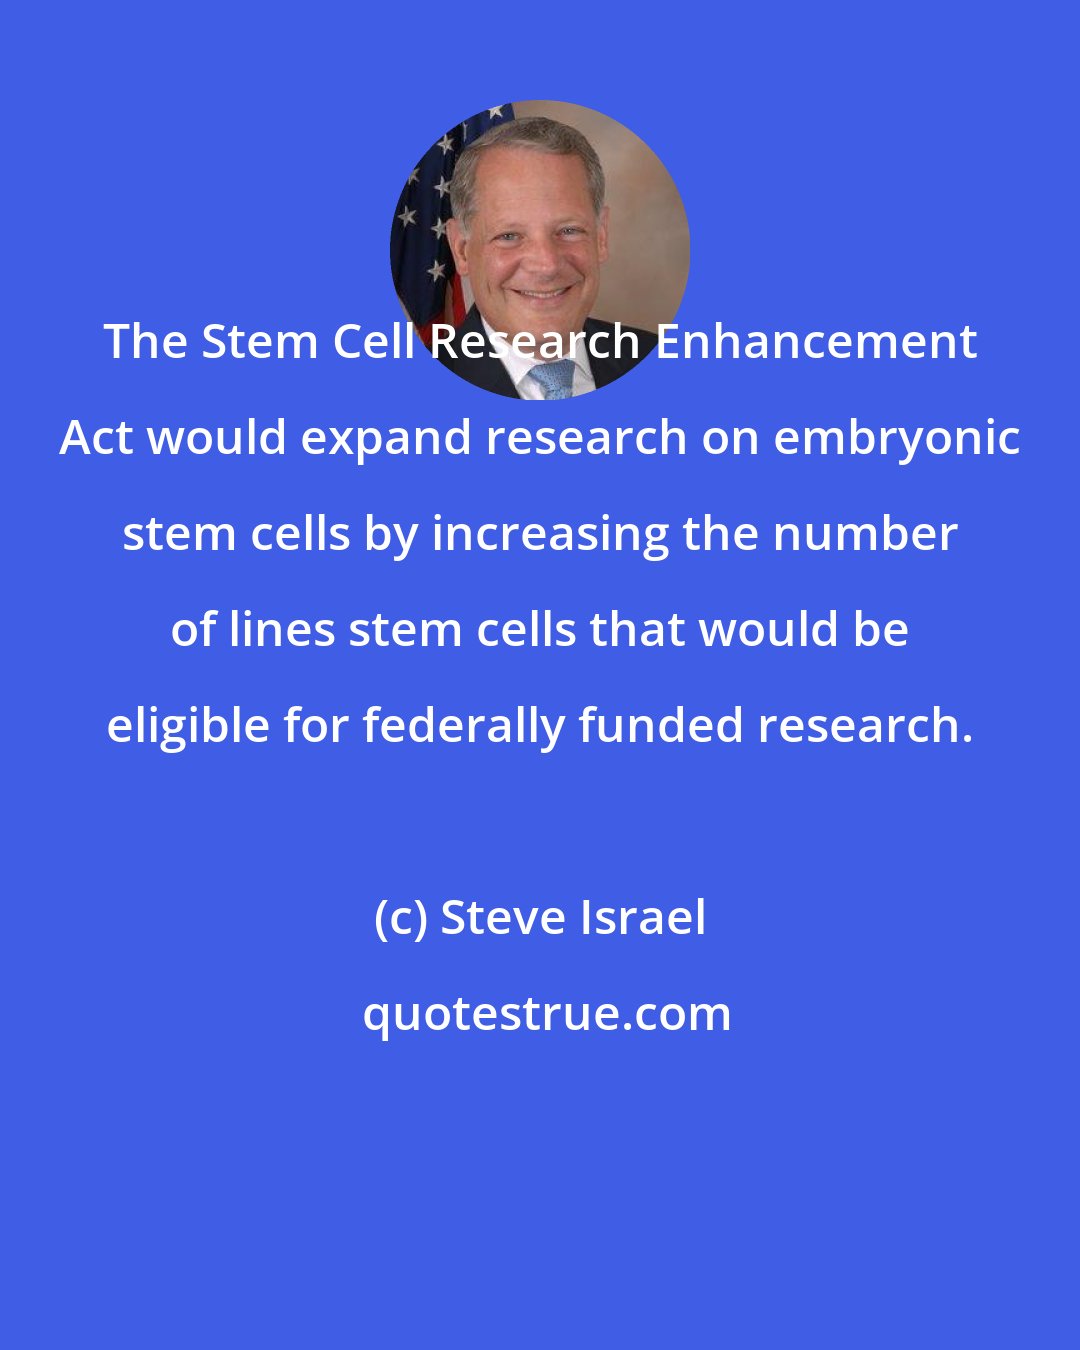 Steve Israel: The Stem Cell Research Enhancement Act would expand research on embryonic stem cells by increasing the number of lines stem cells that would be eligible for federally funded research.